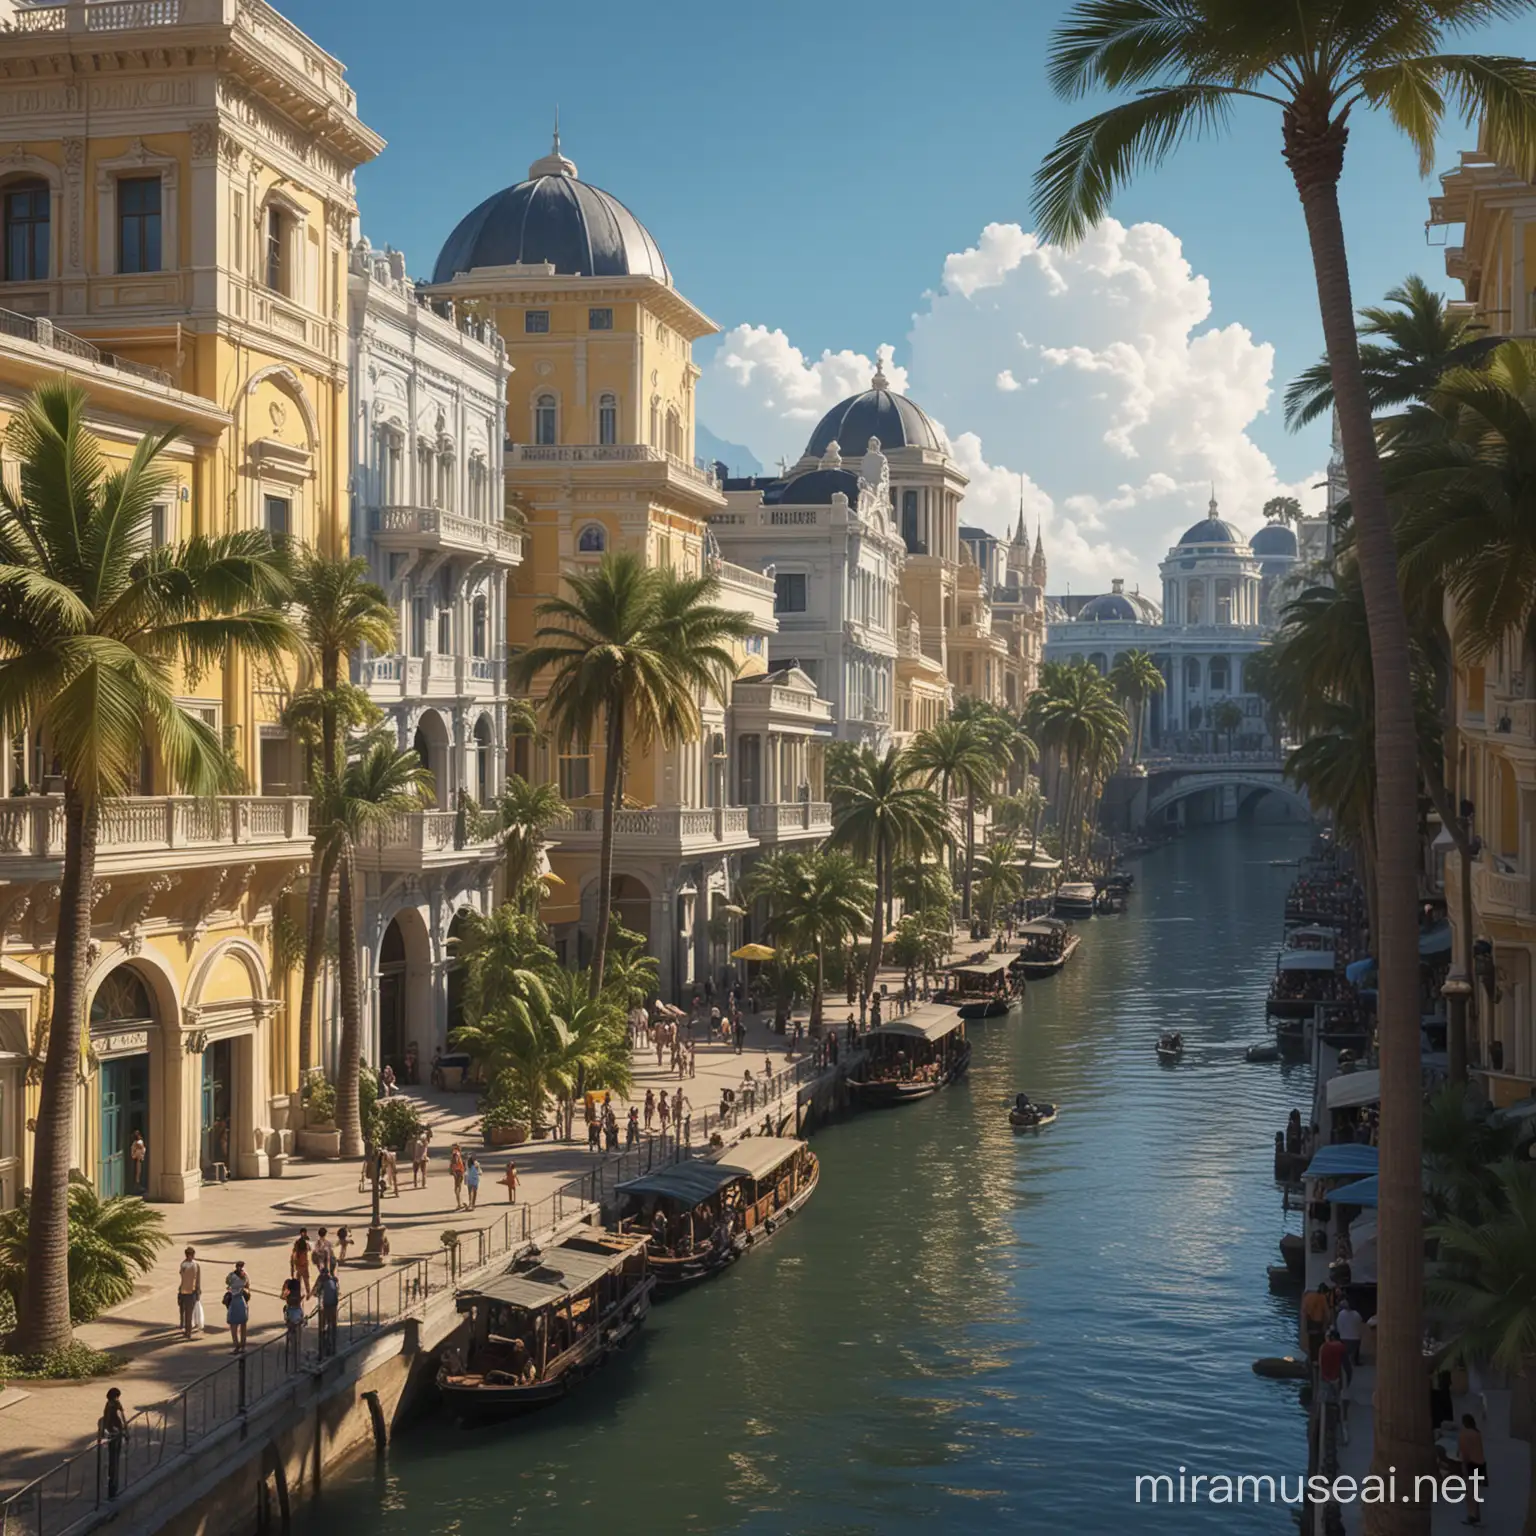 longshot , sun lighting of a utopia Tomorrowland 2015 river city. buildings are detailed of neoclassical style. moon is big. buildings are blue  white and yellow . lots of palm trees . place is exotic. city looks realistic